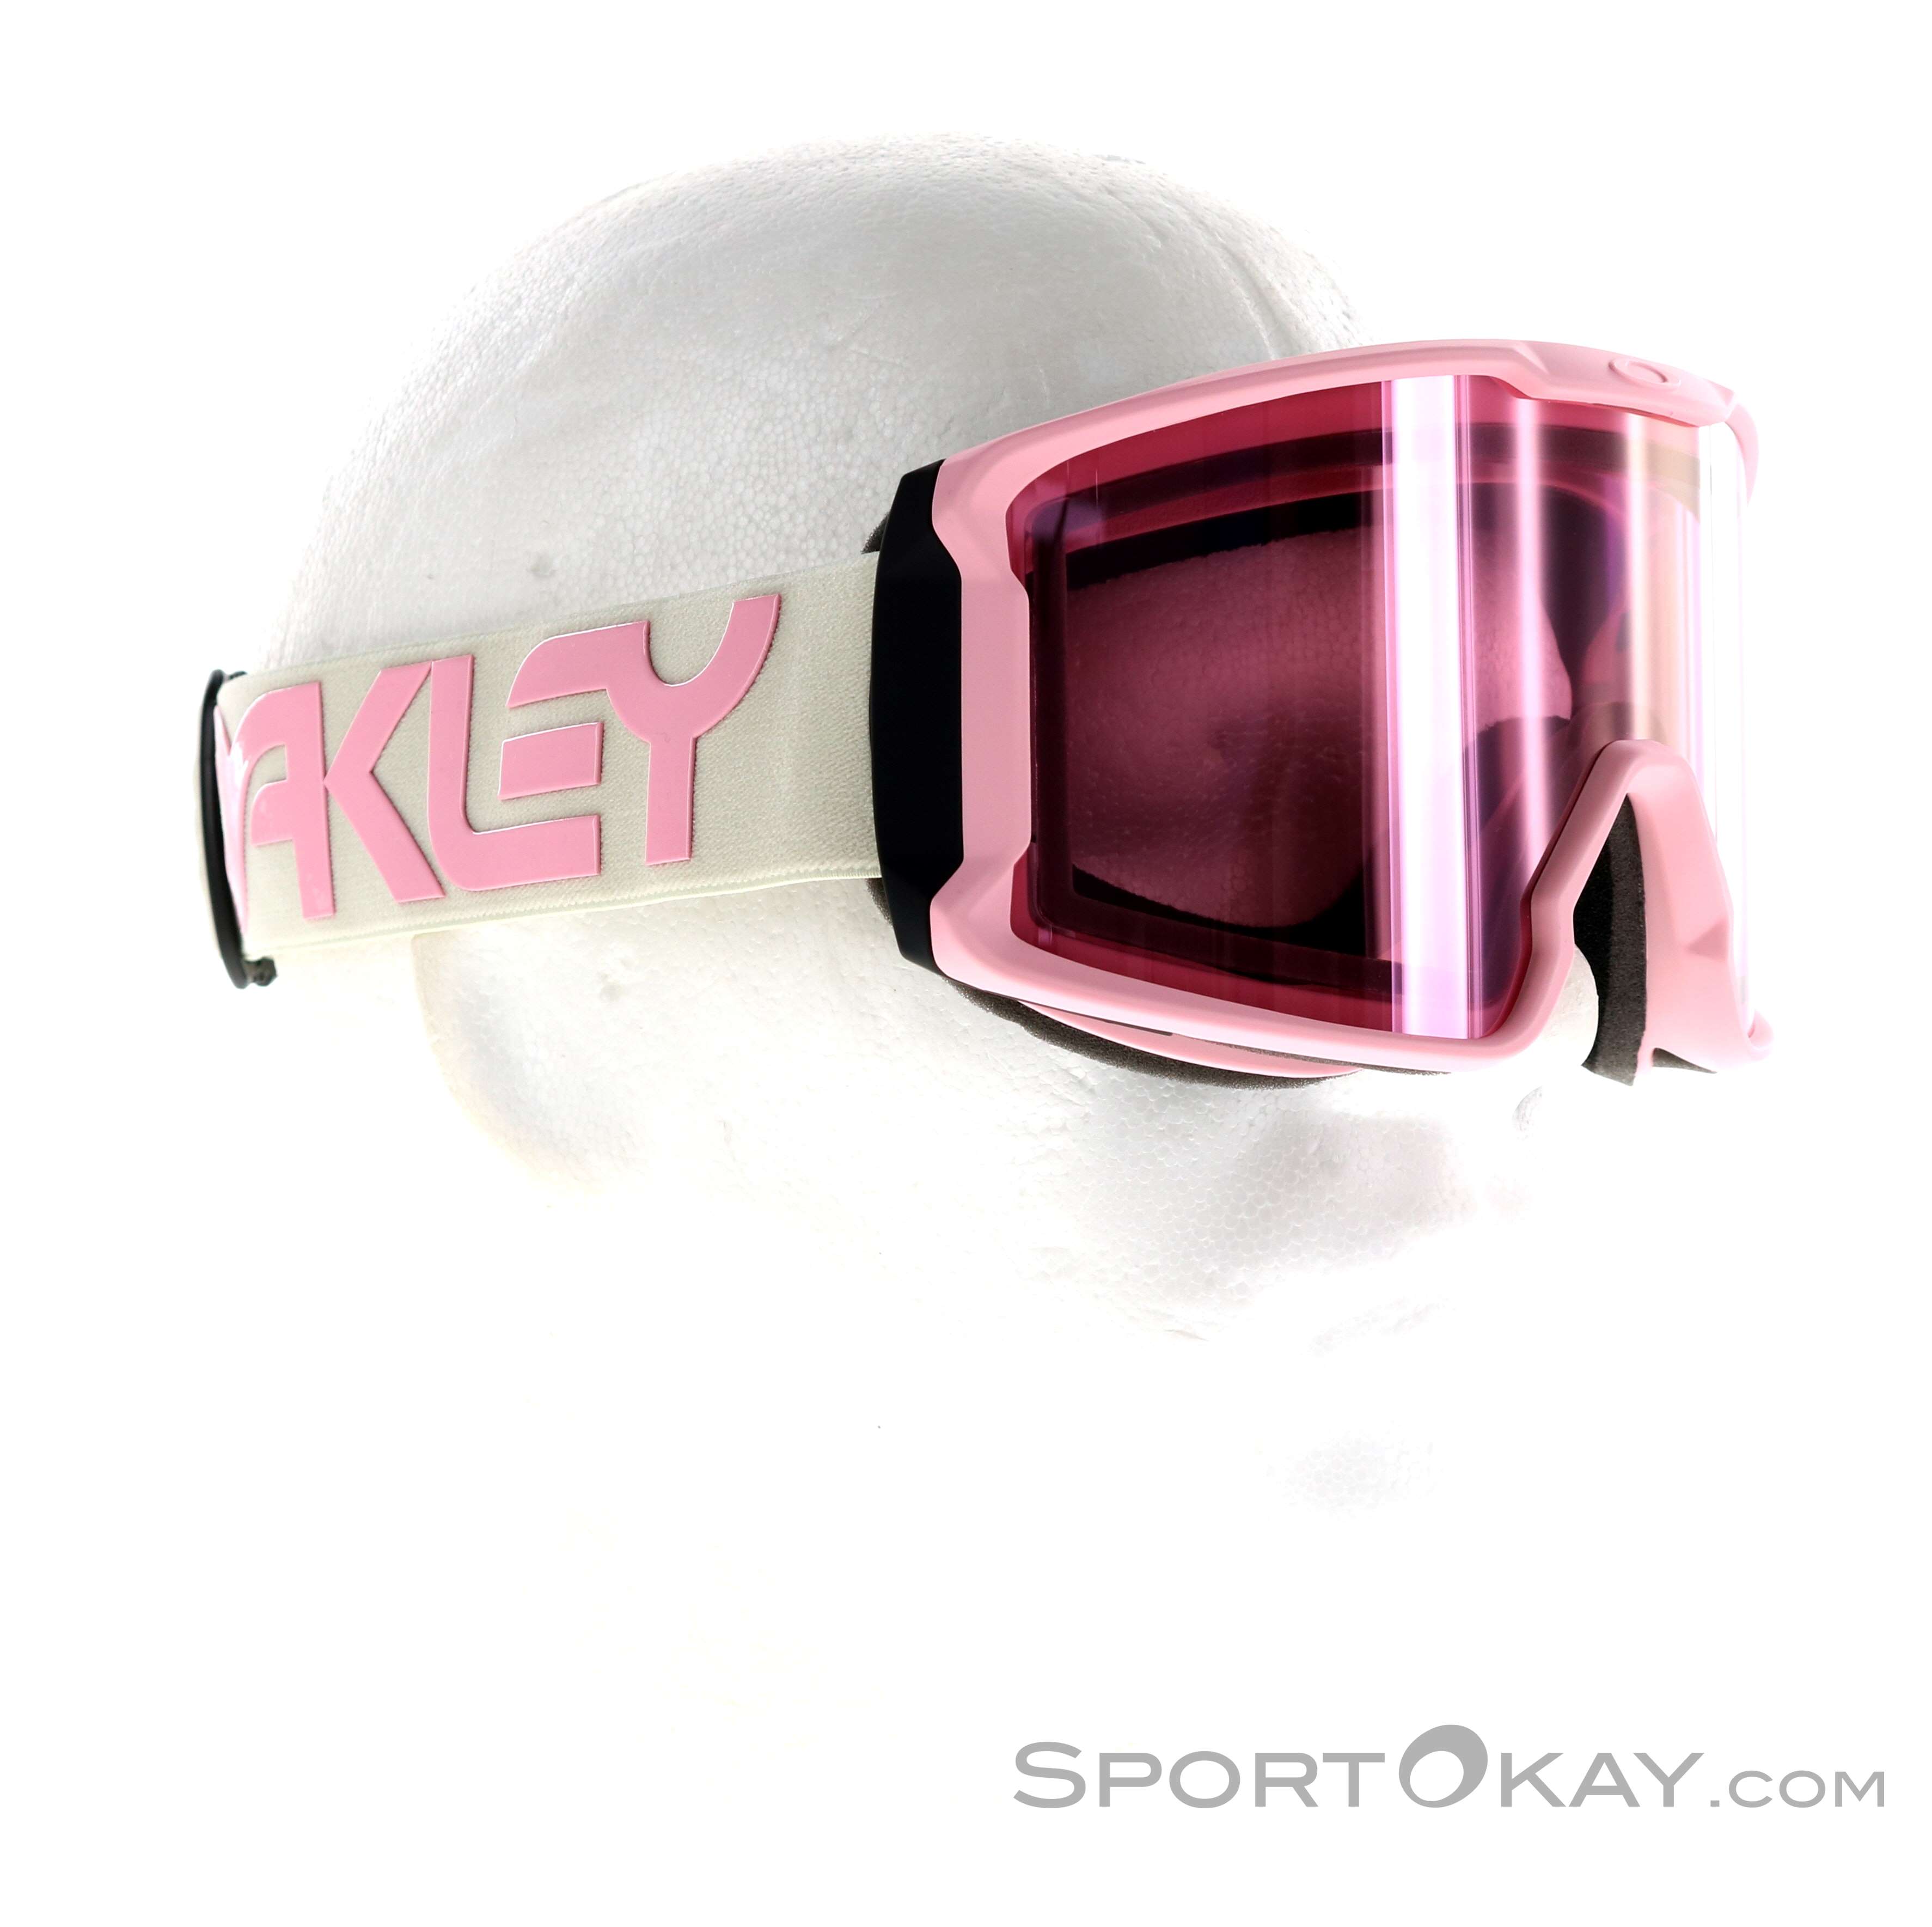 oakley pink goggles